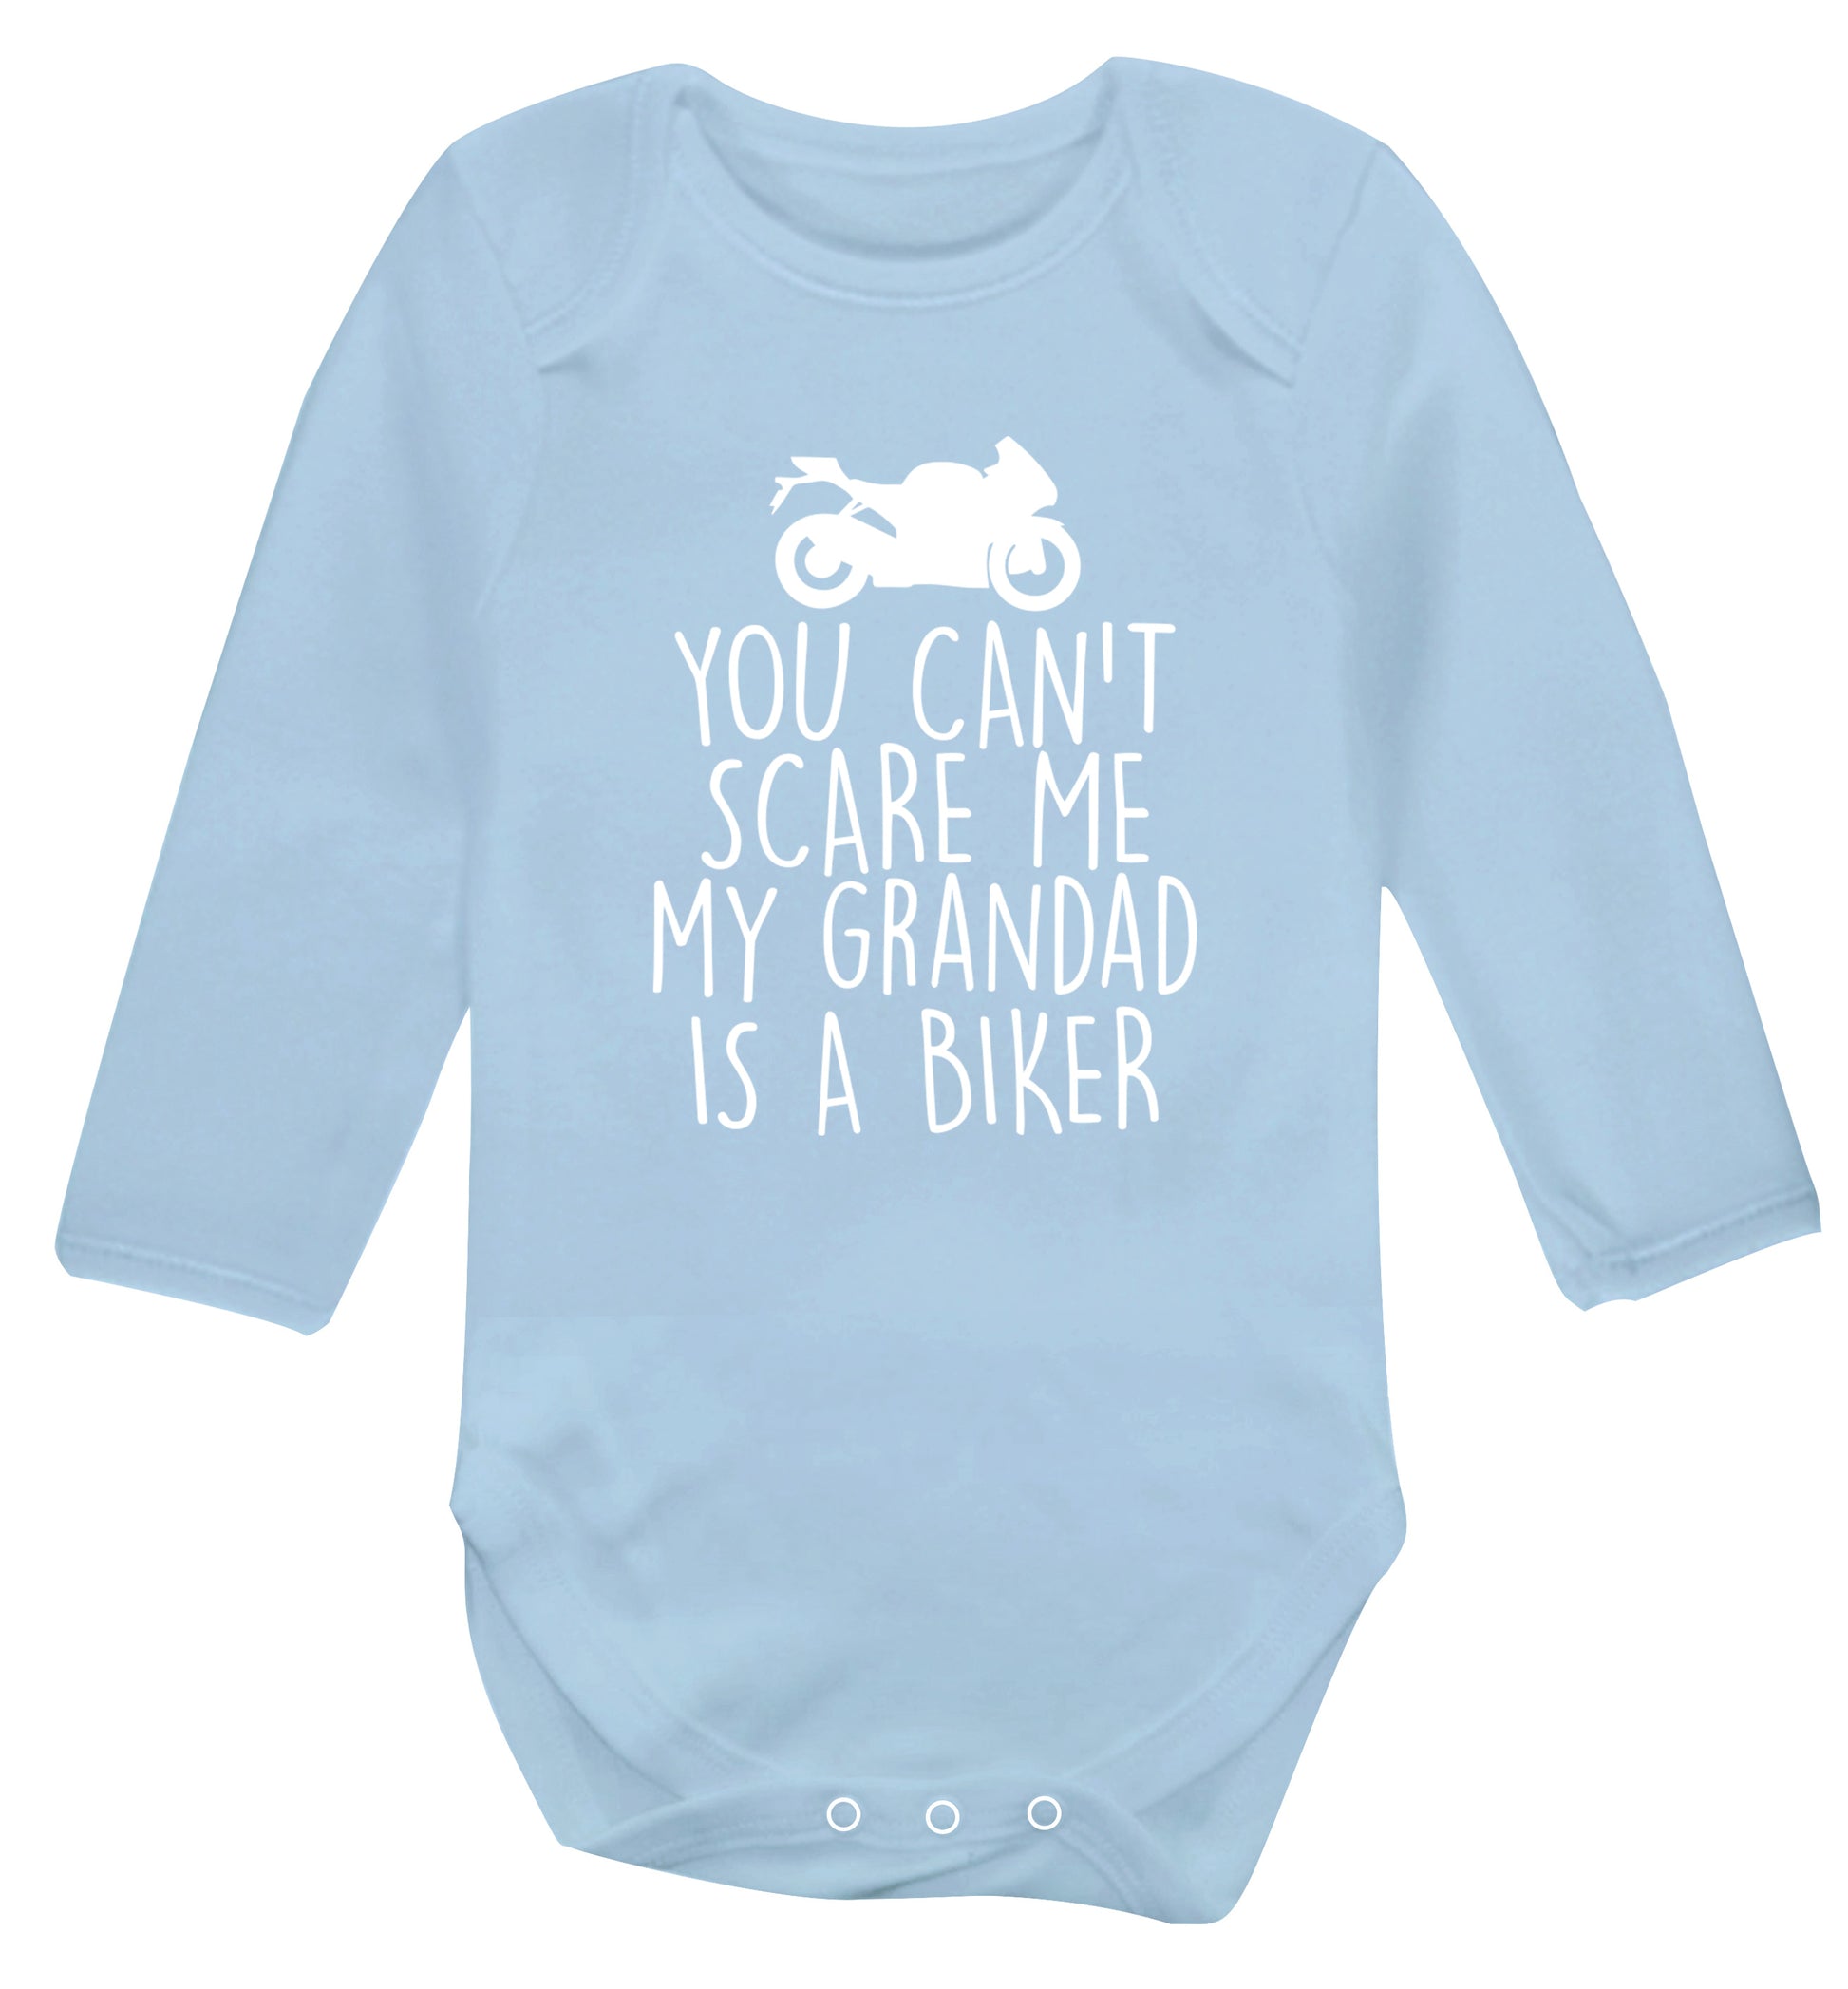 You can't scare me my grandad is a biker Baby Vest long sleeved pale blue 6-12 months